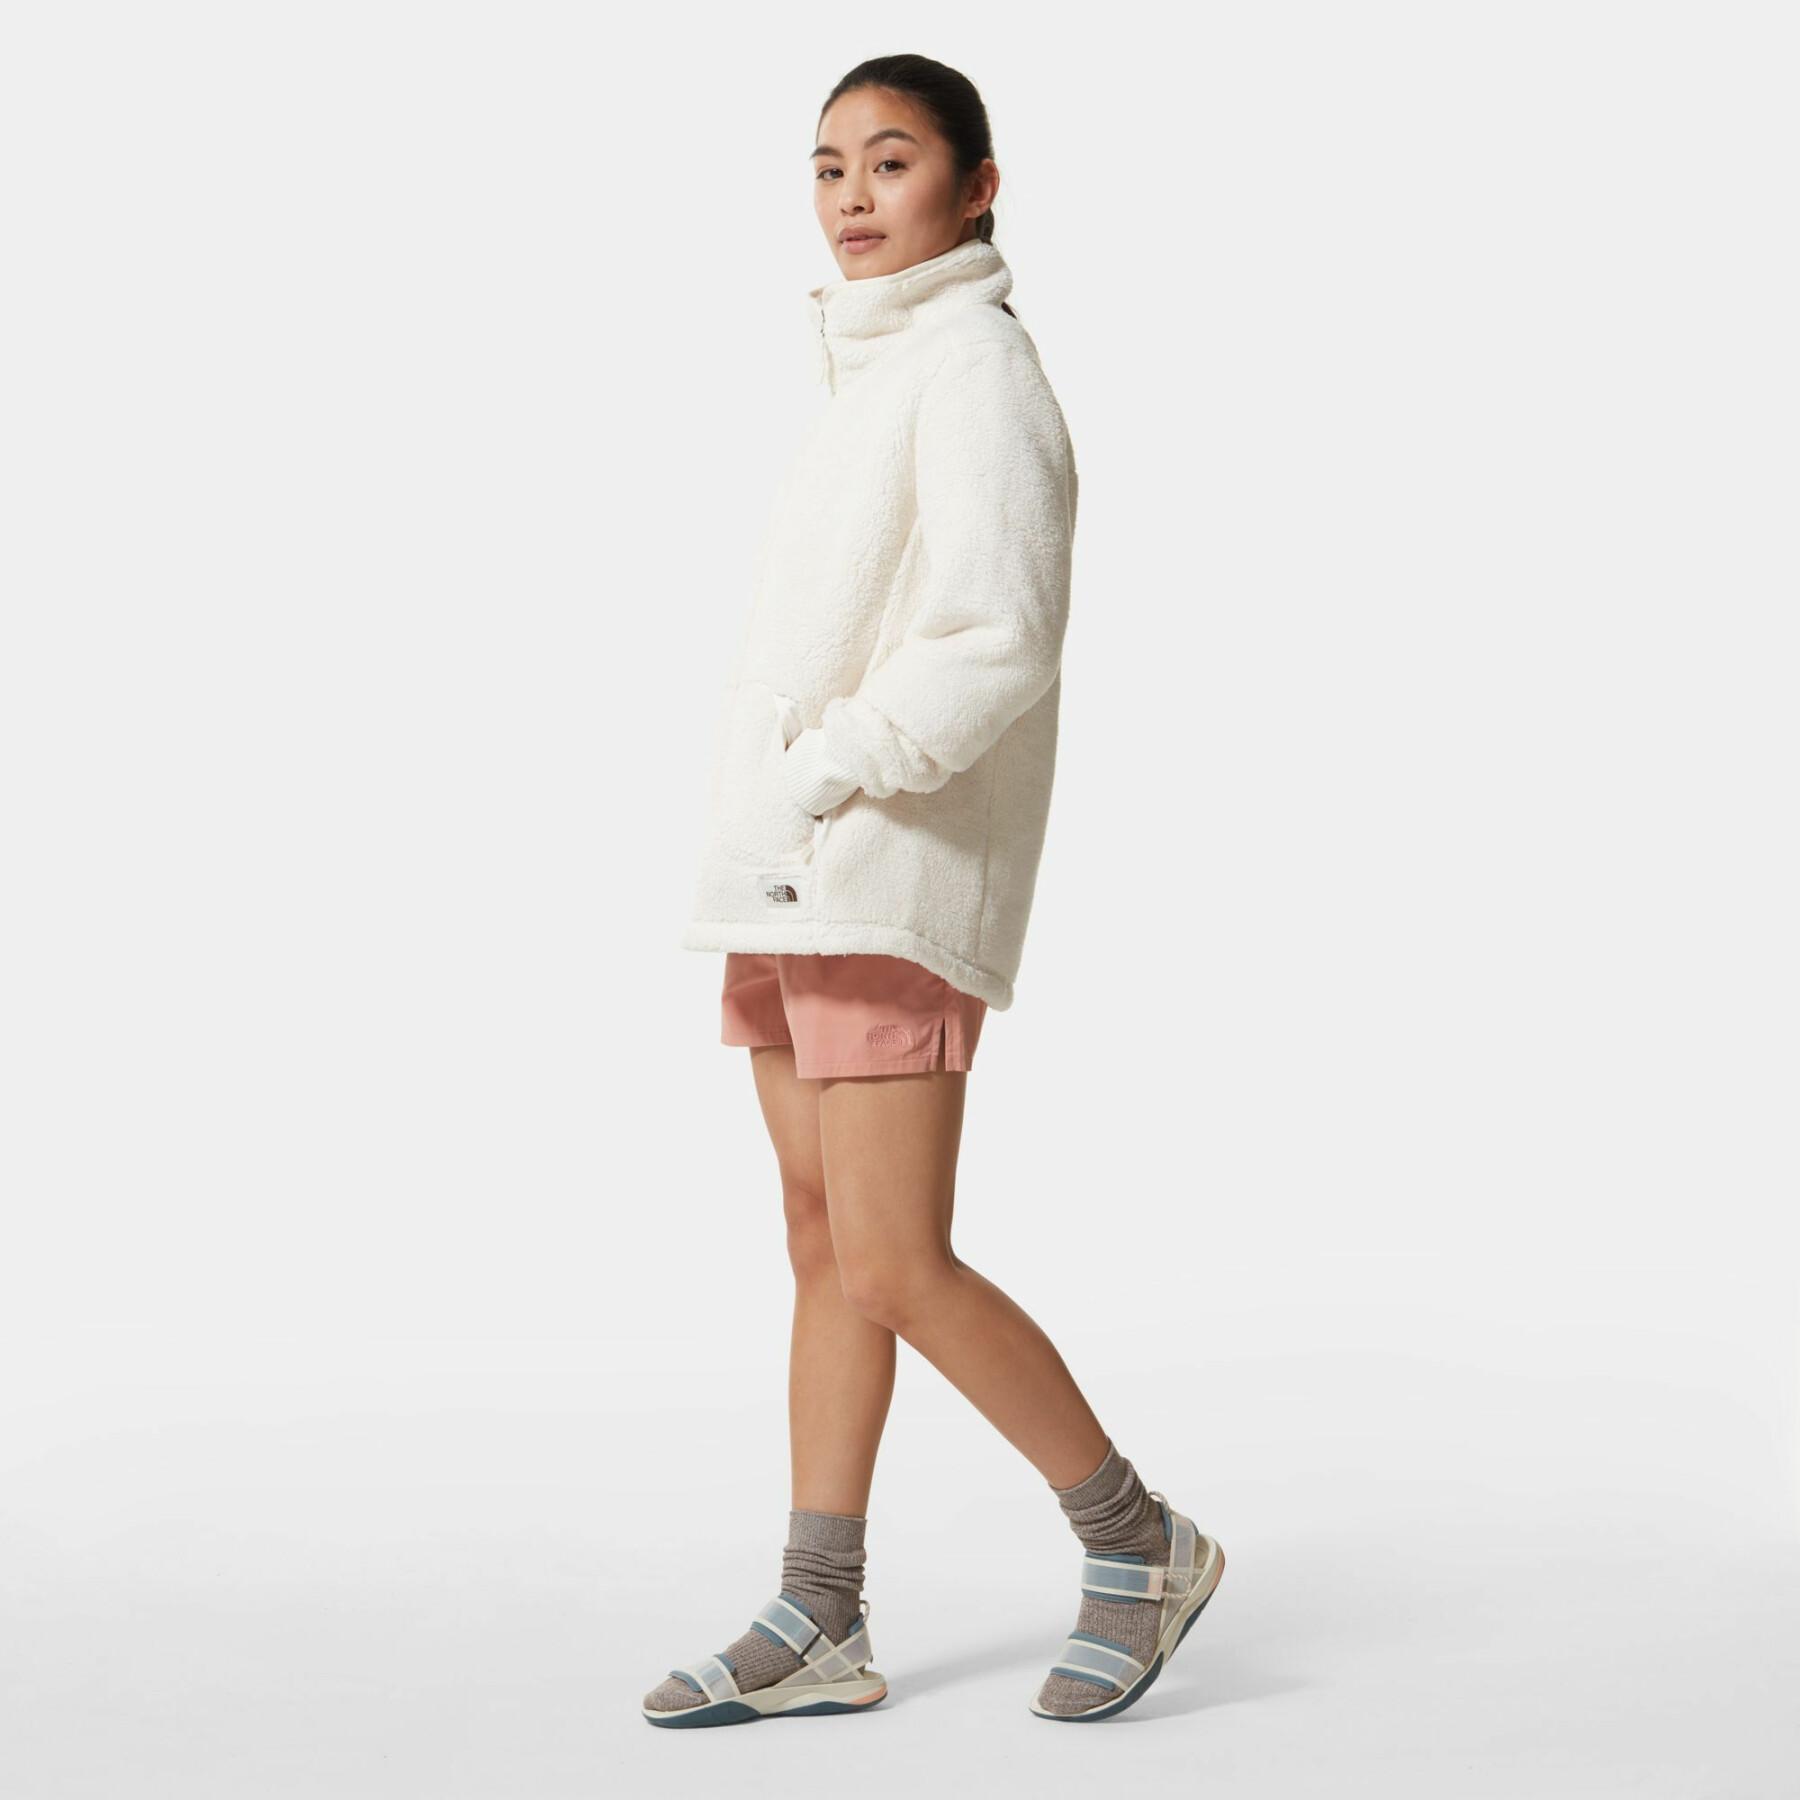 Dames fleece The North Face Campshire